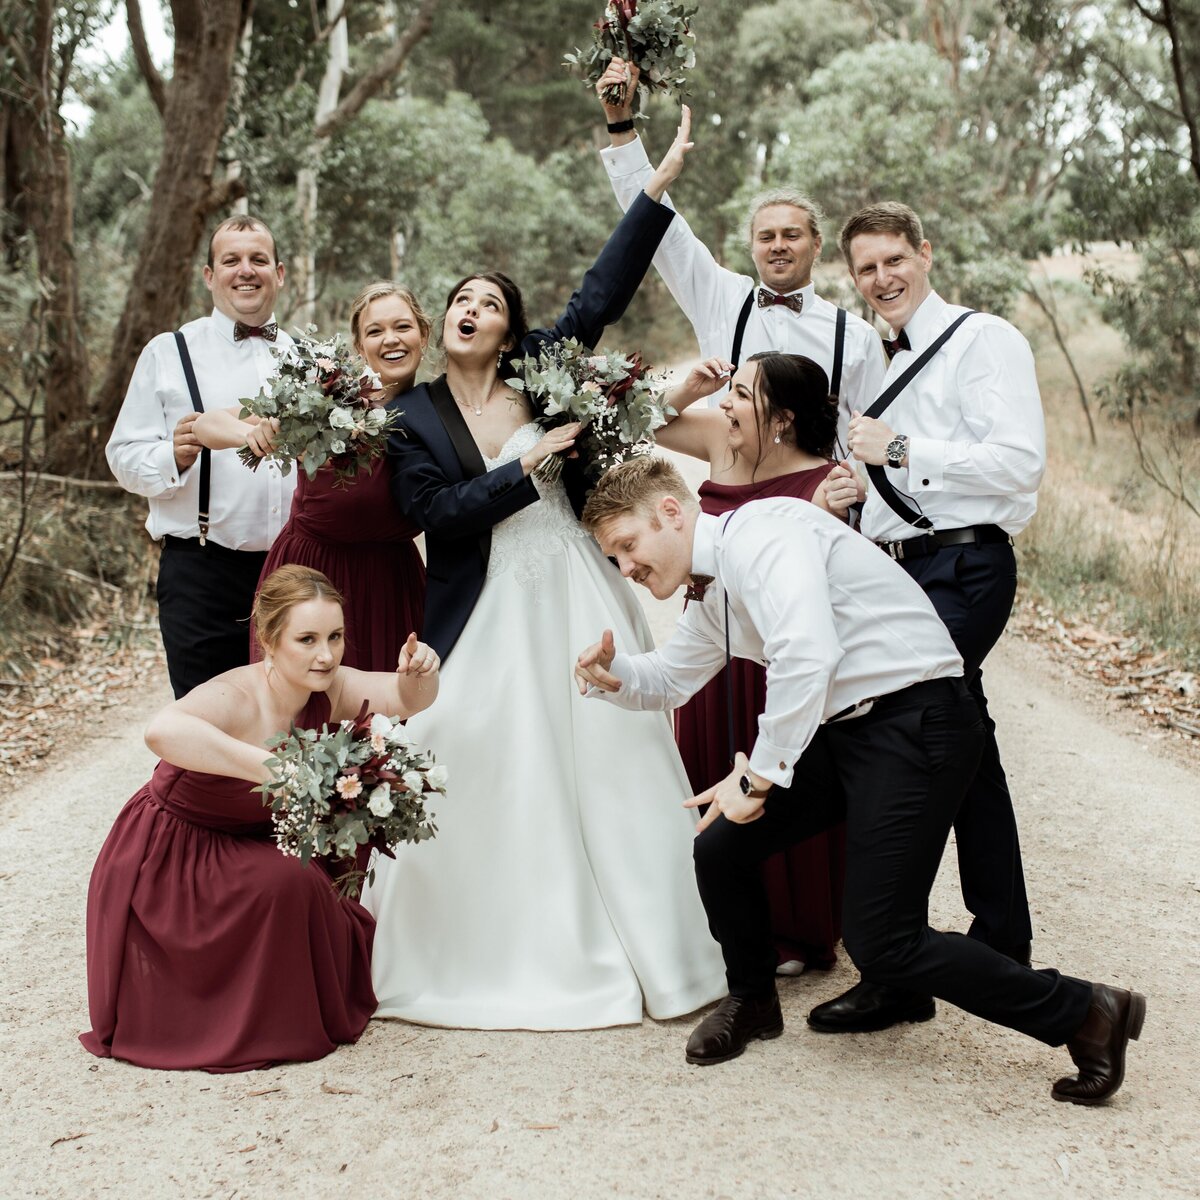 M&R-Anderson-Hill-Rexvil-Photography-Adelaide-Wedding-Photographer-502